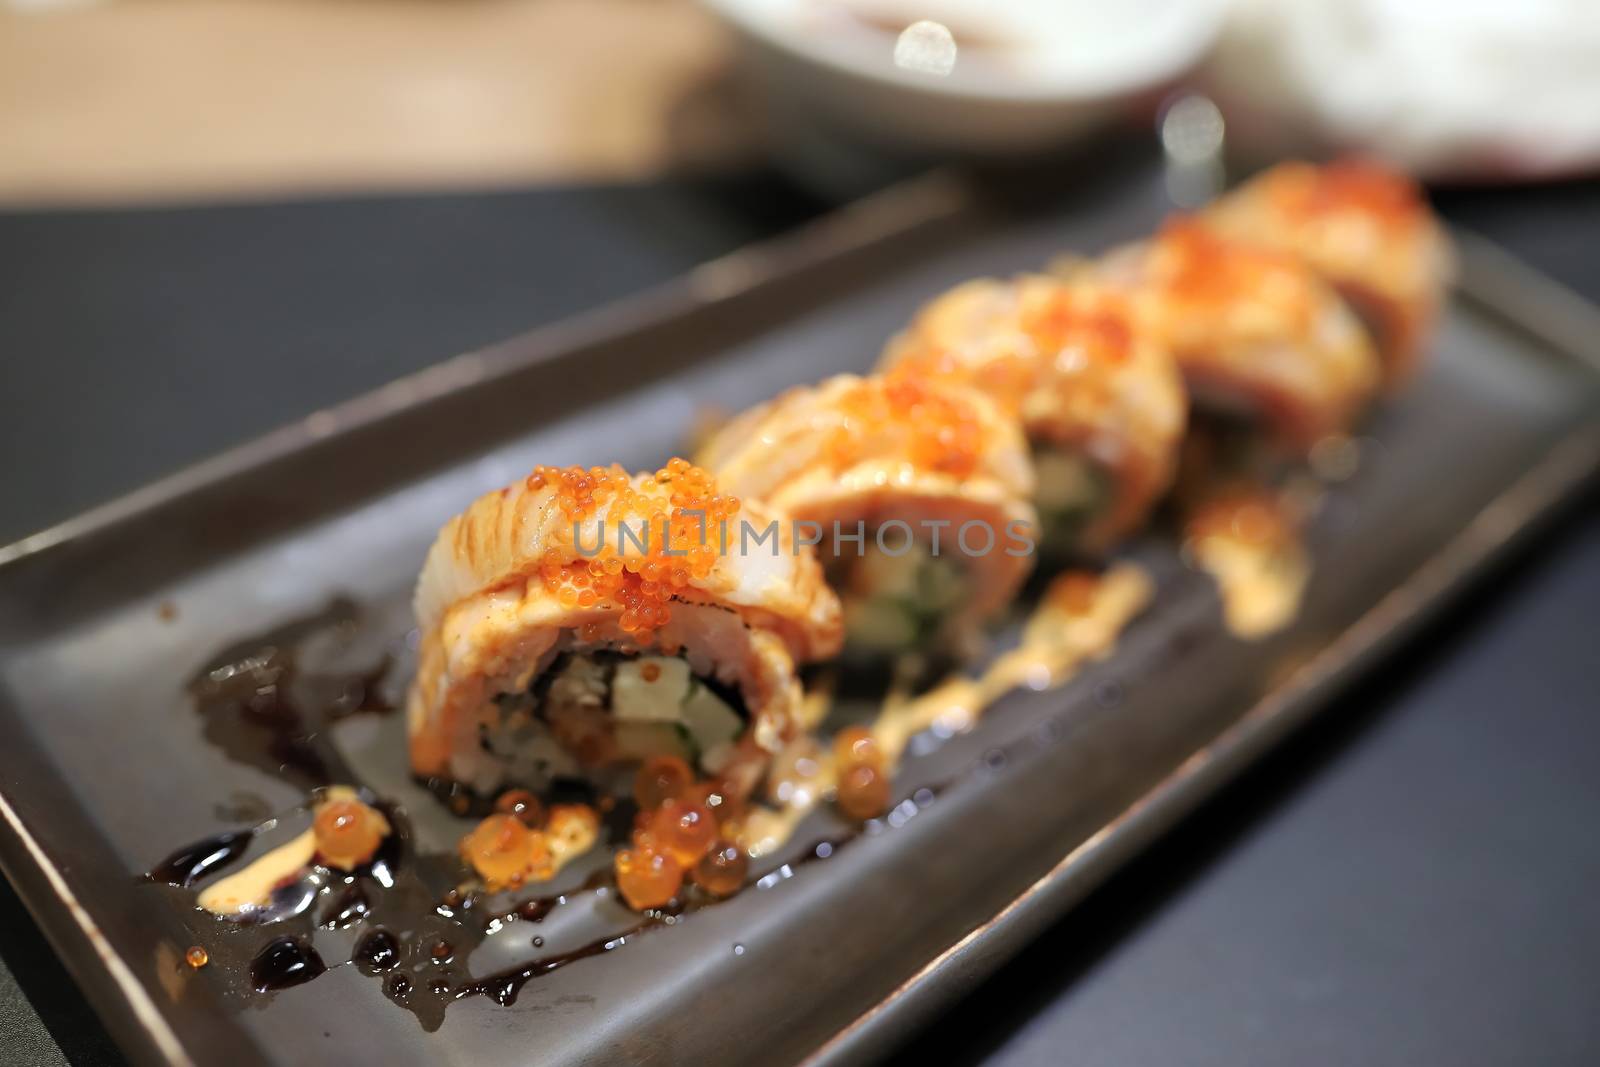 Engawa roll Topped with orange flying fish roe In a square plate In a japanese restaurant. Selective focus. by joker3753